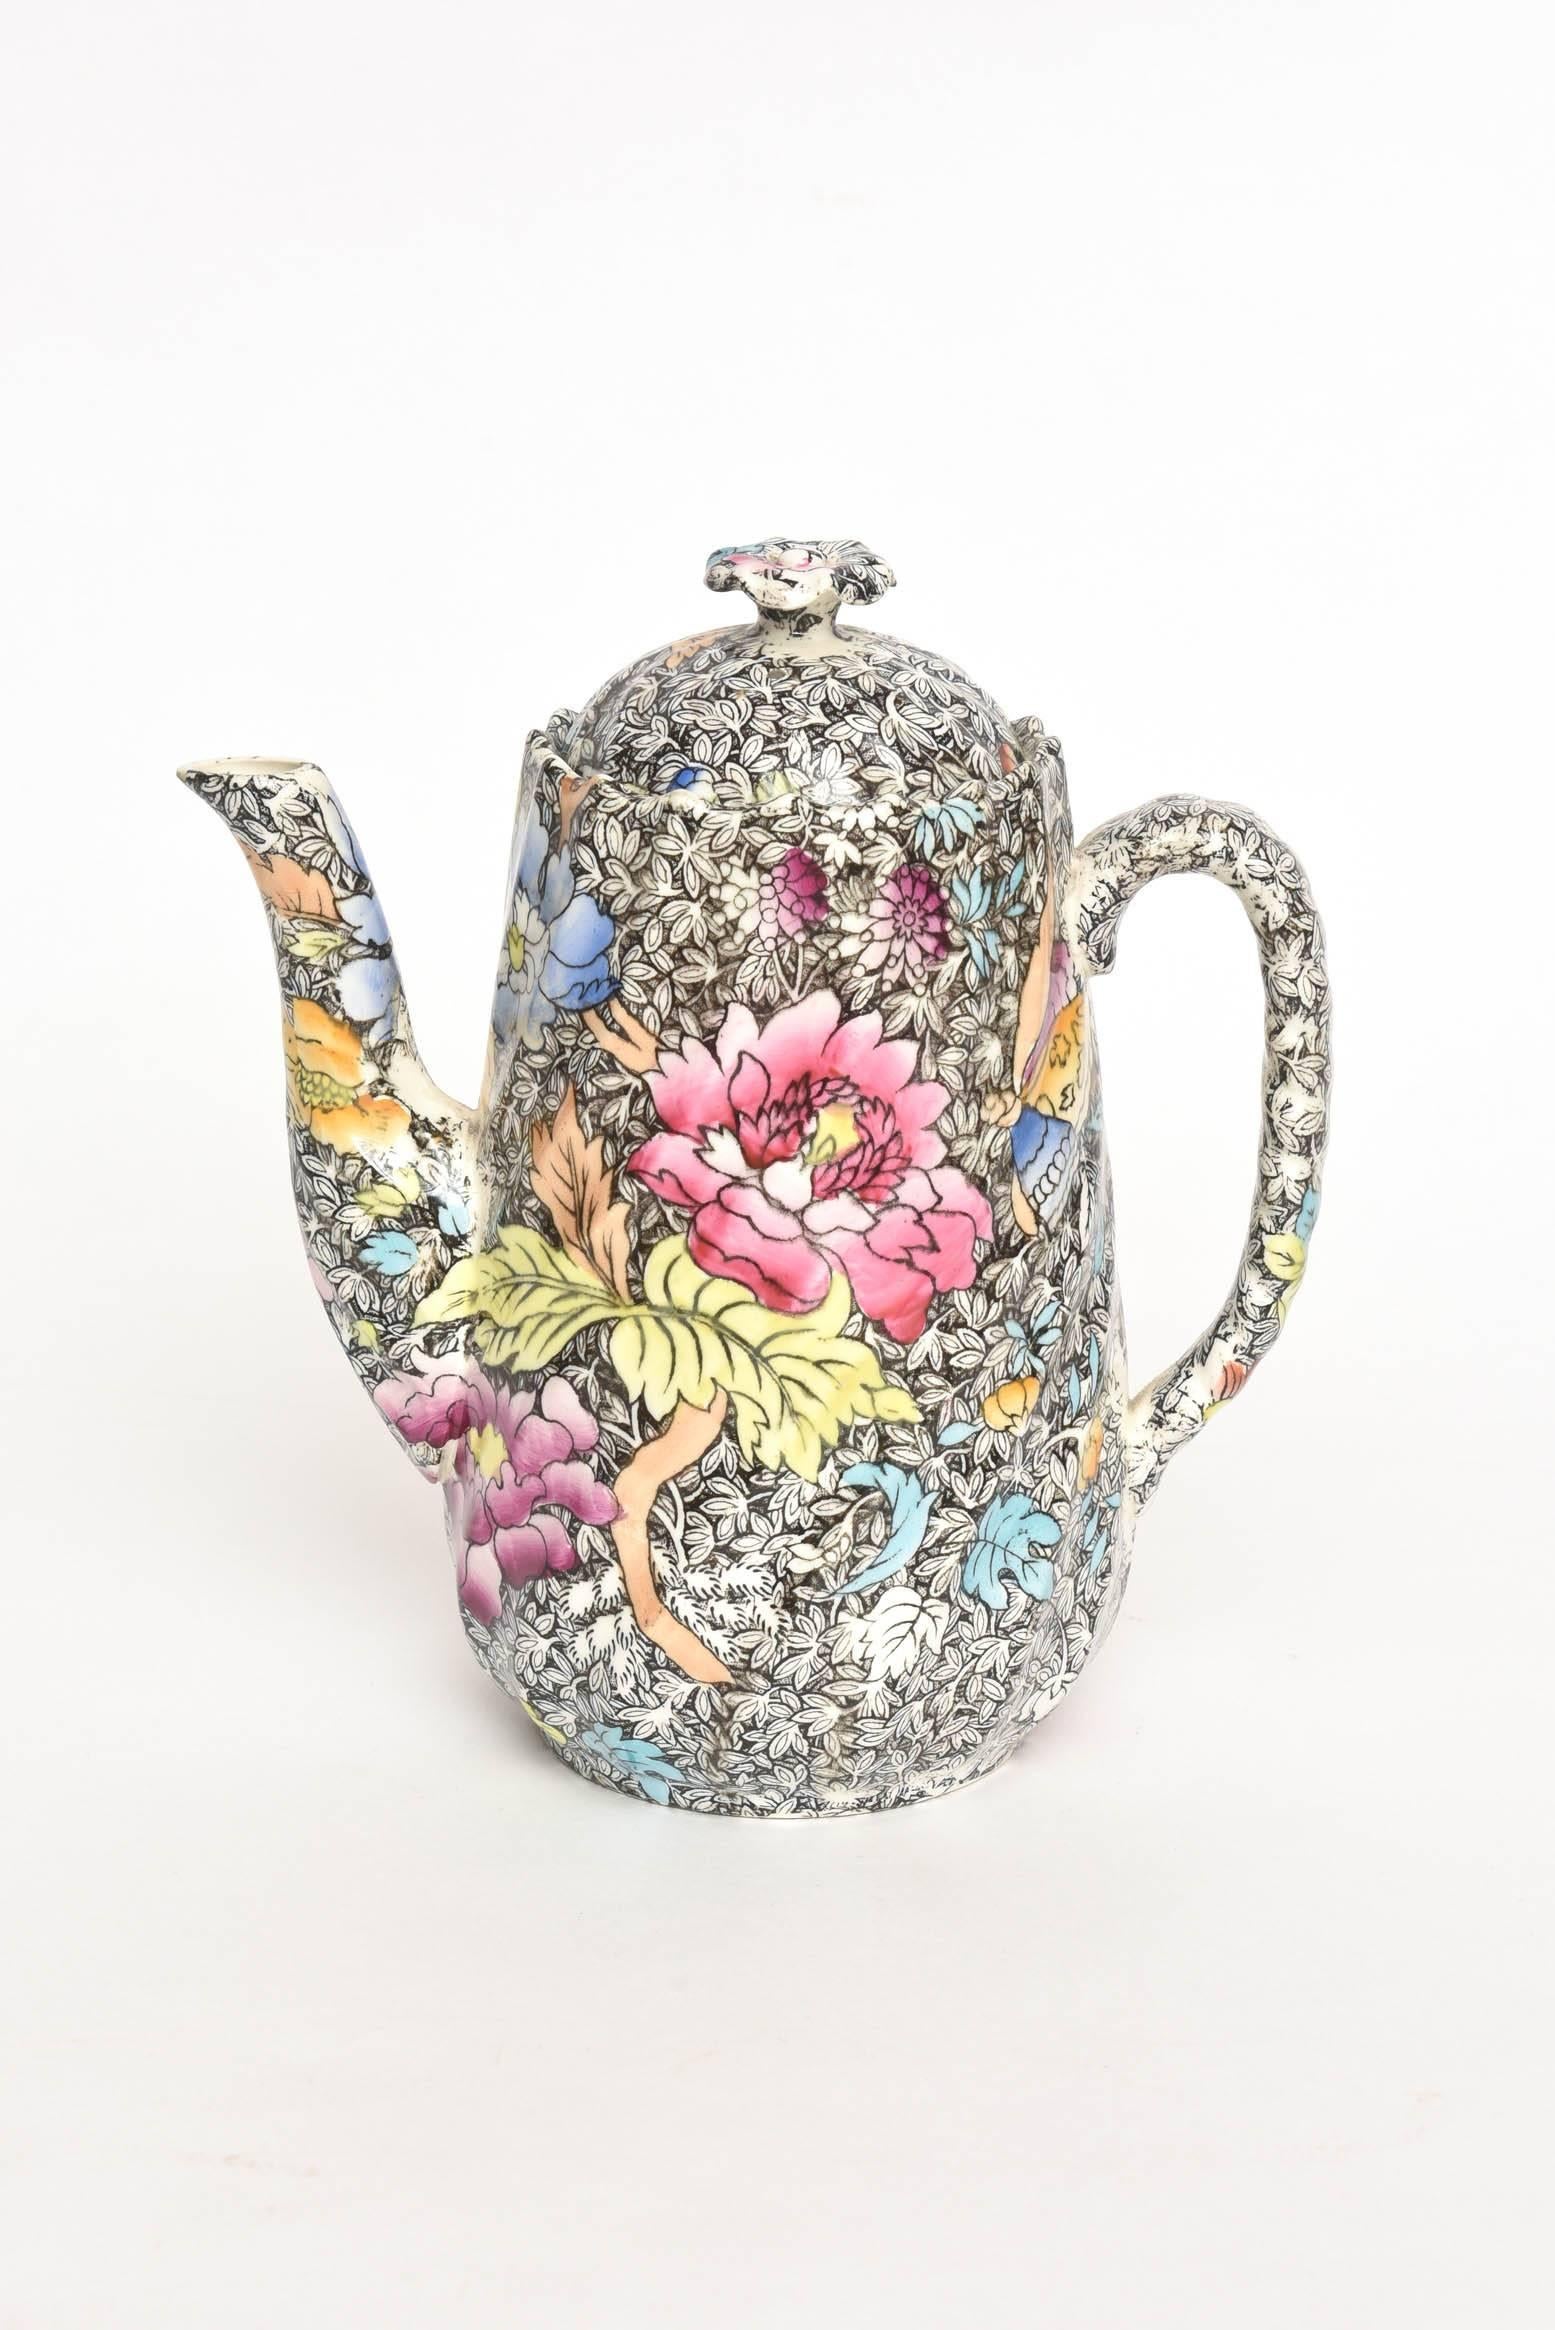 A delightful sweet coffee pot featuring an Aesthetic movement background with nicely hand colored and vividly painted florals. All pieces are in super condition and just the smallest amount of crazing which does not affect the beauty or complete